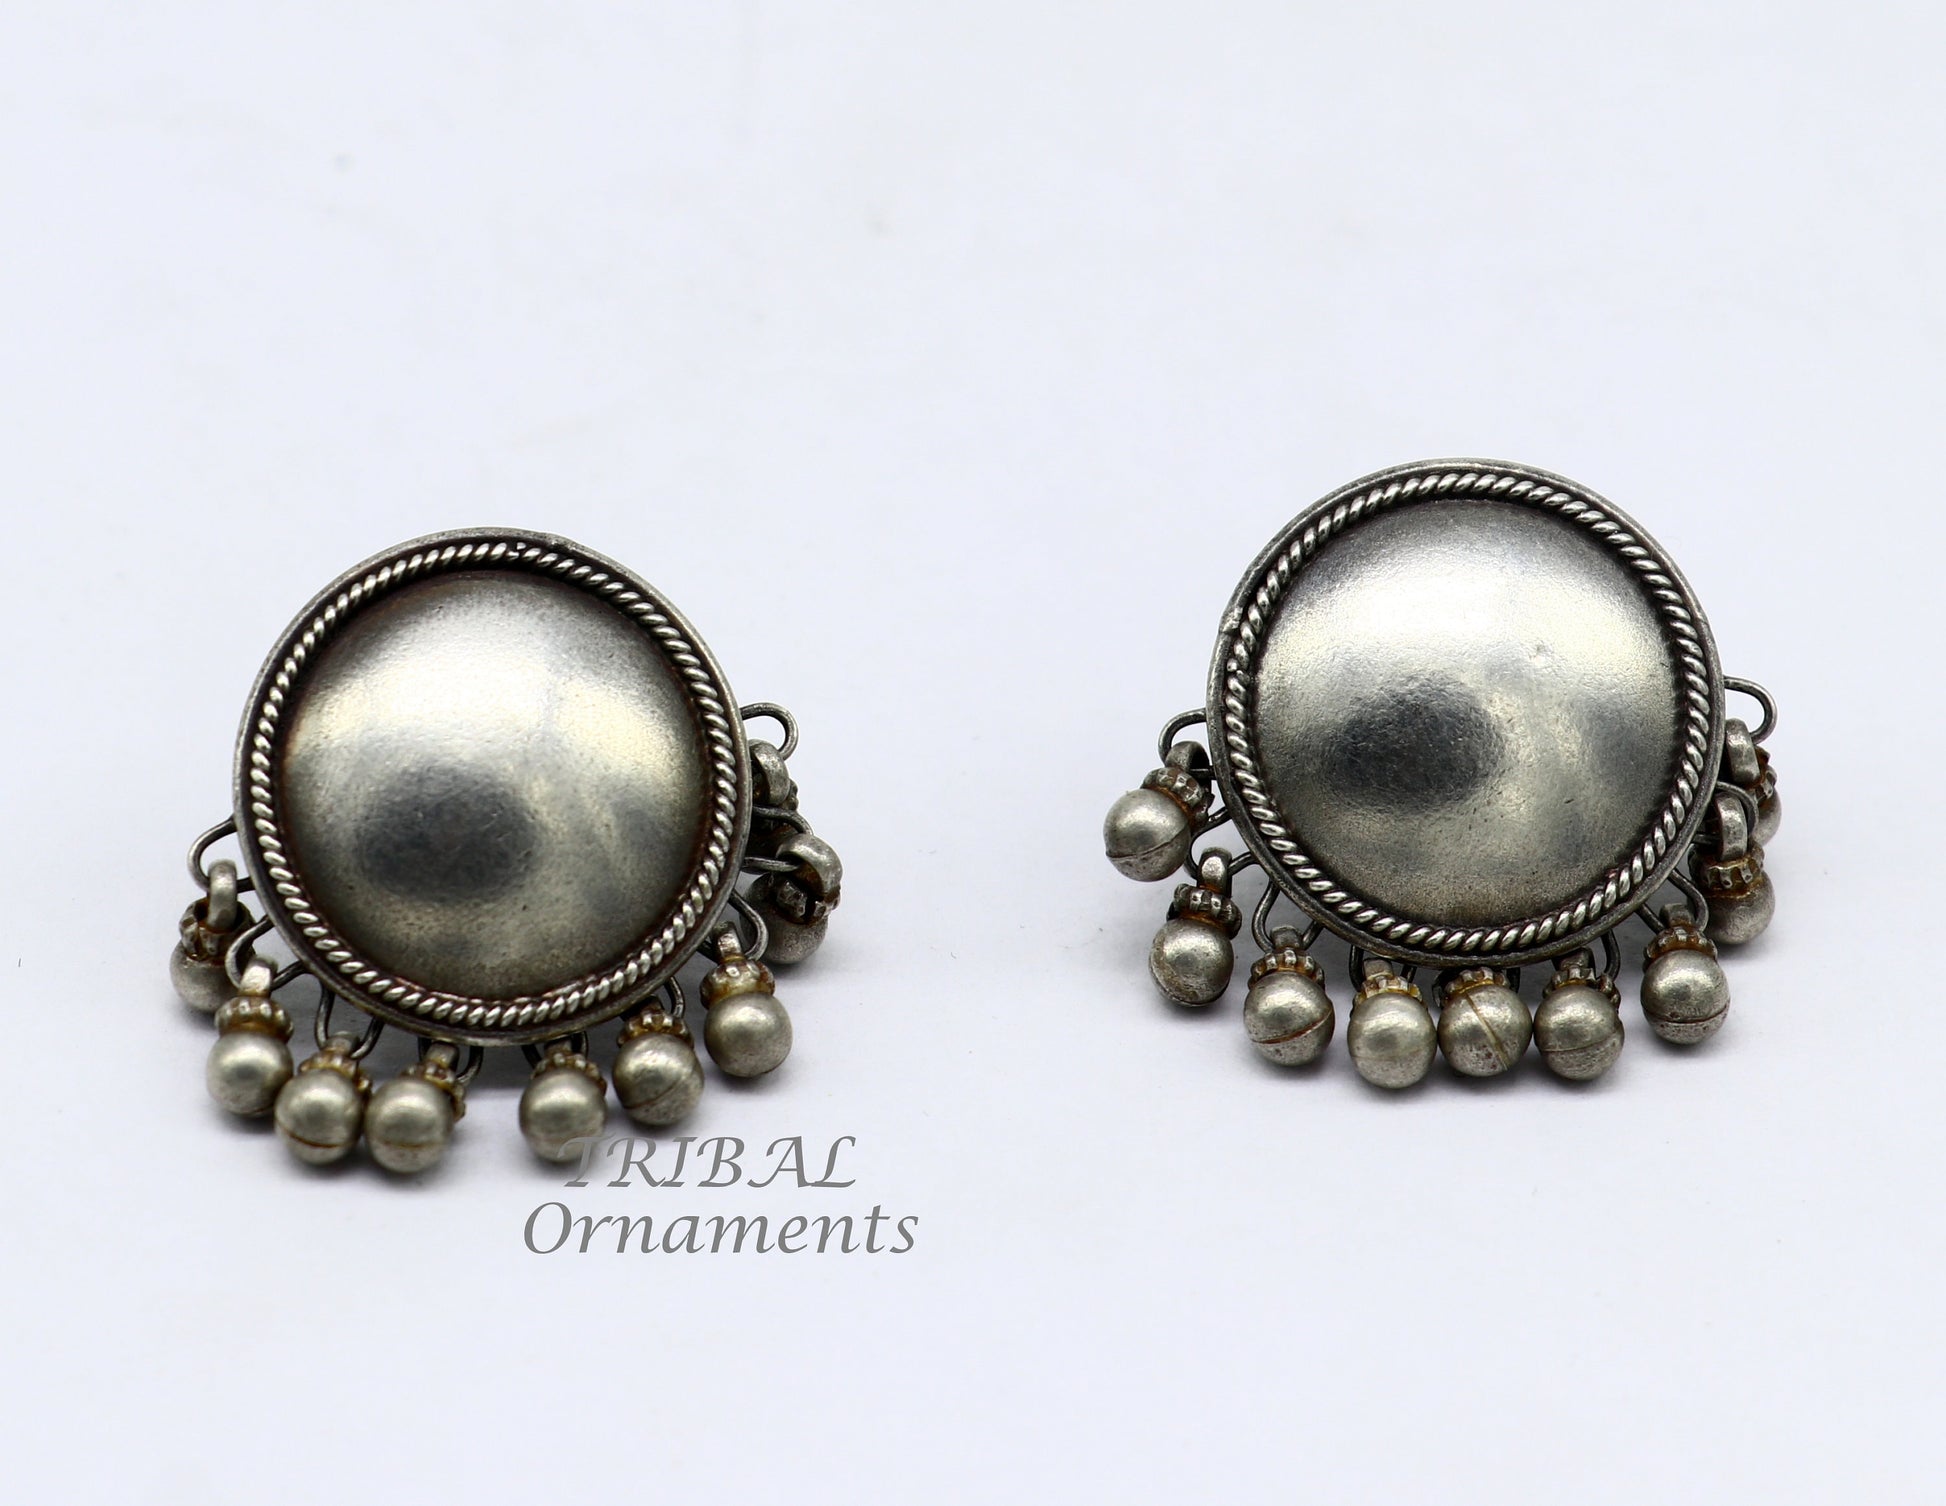 Vintage design 925 sterling silver plain style handmade round design fabulous Stud earrings tribal jewelry from Rajasthan india  s1103 - TRIBAL ORNAMENTS